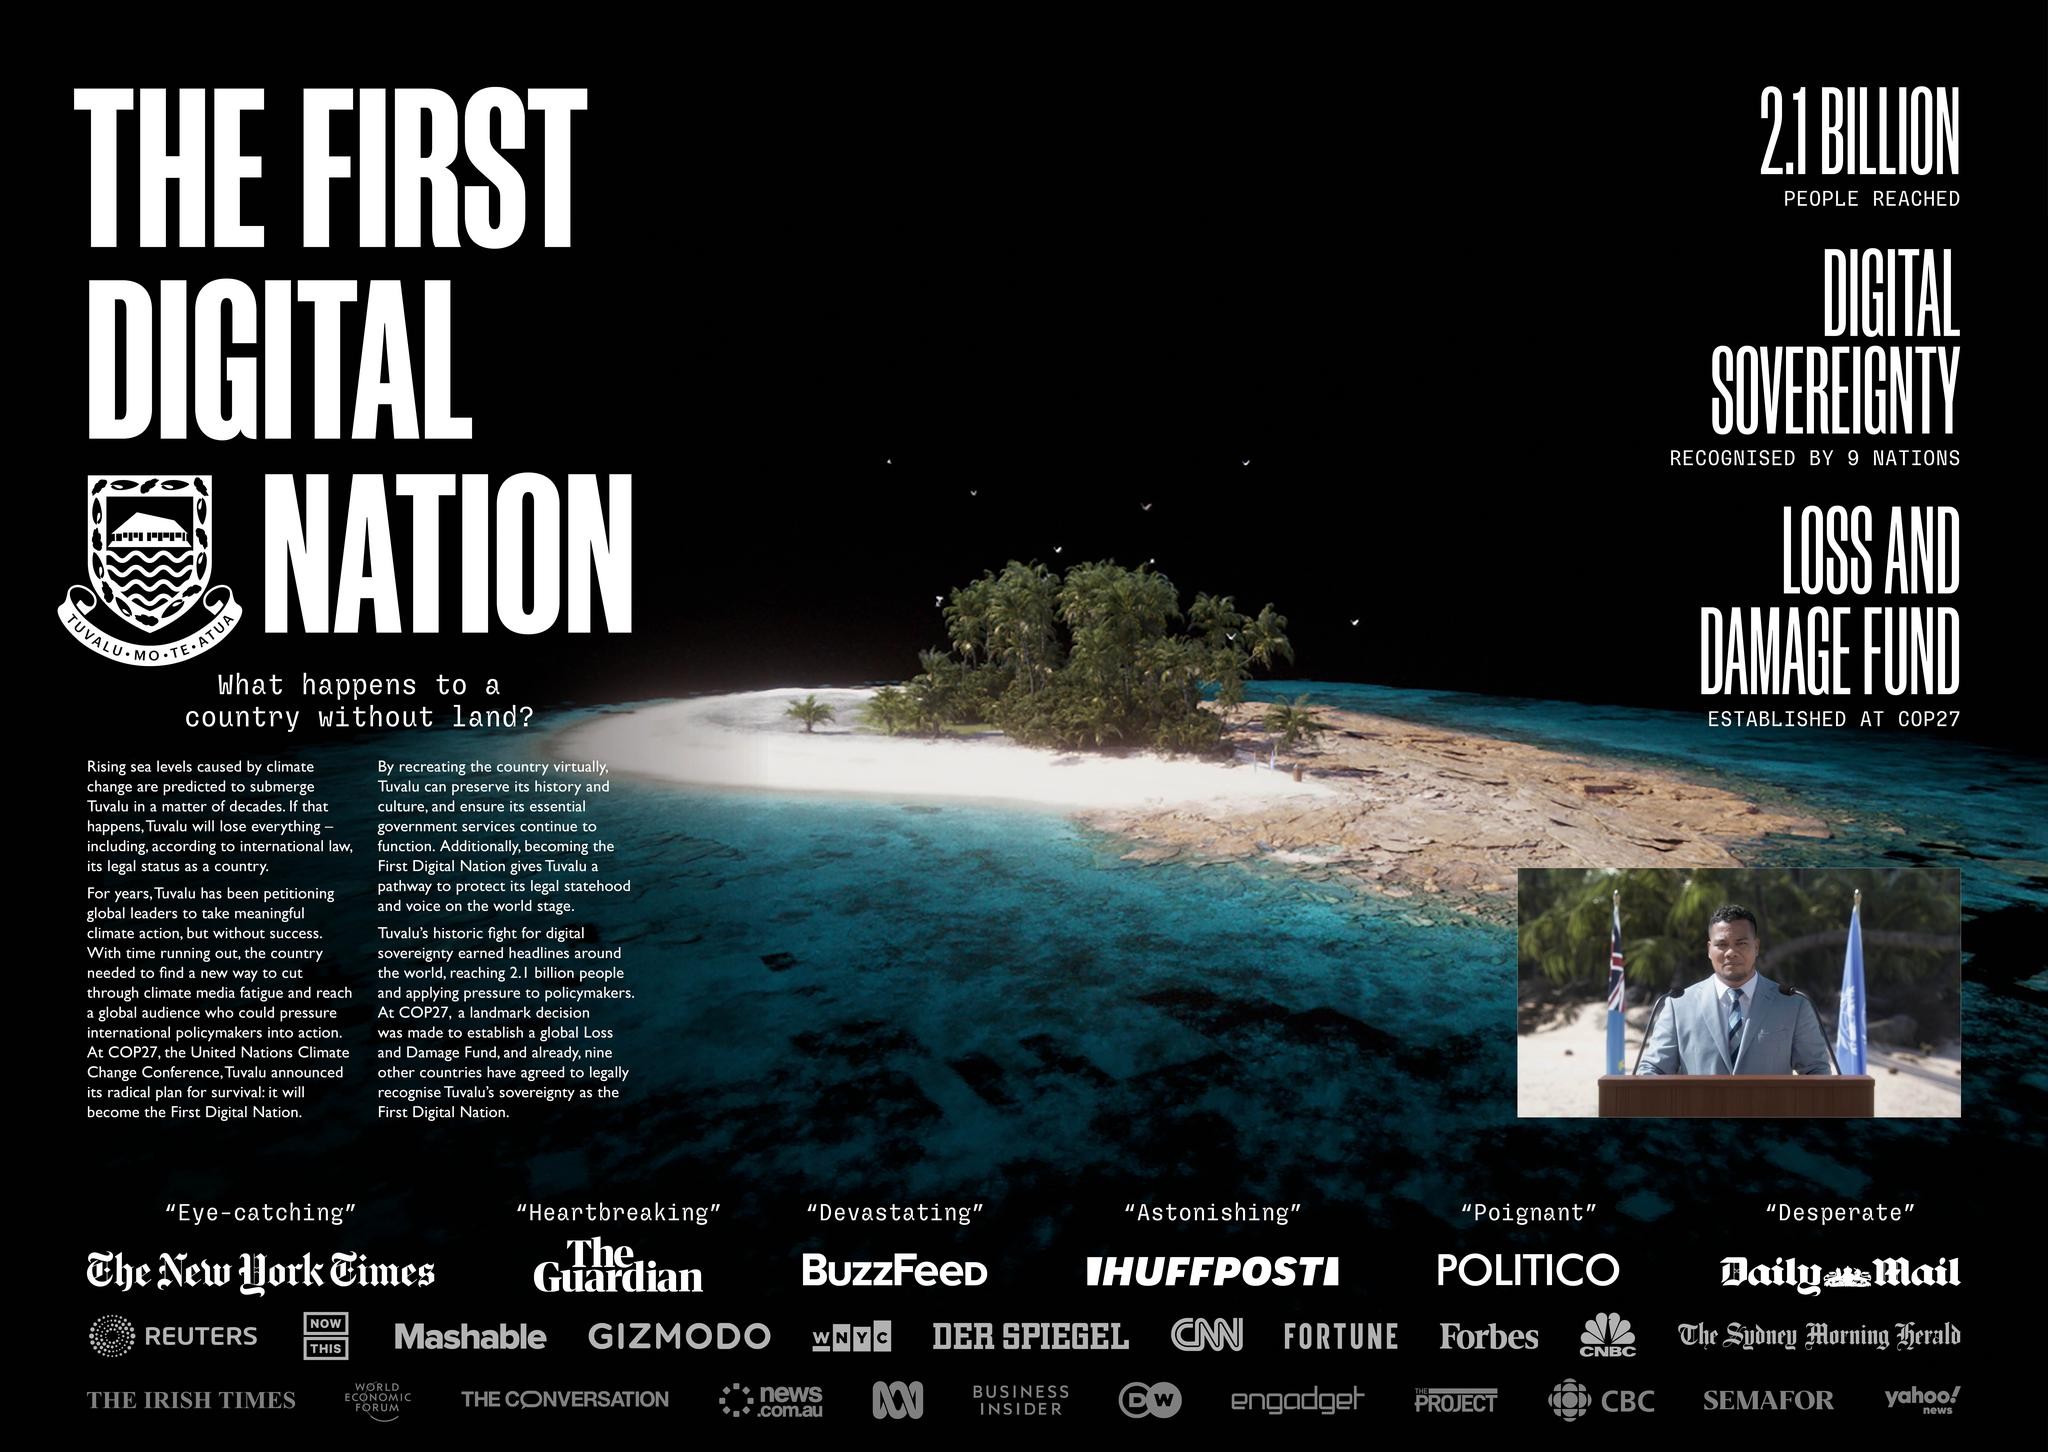 THE FIRST DIGITAL NATION